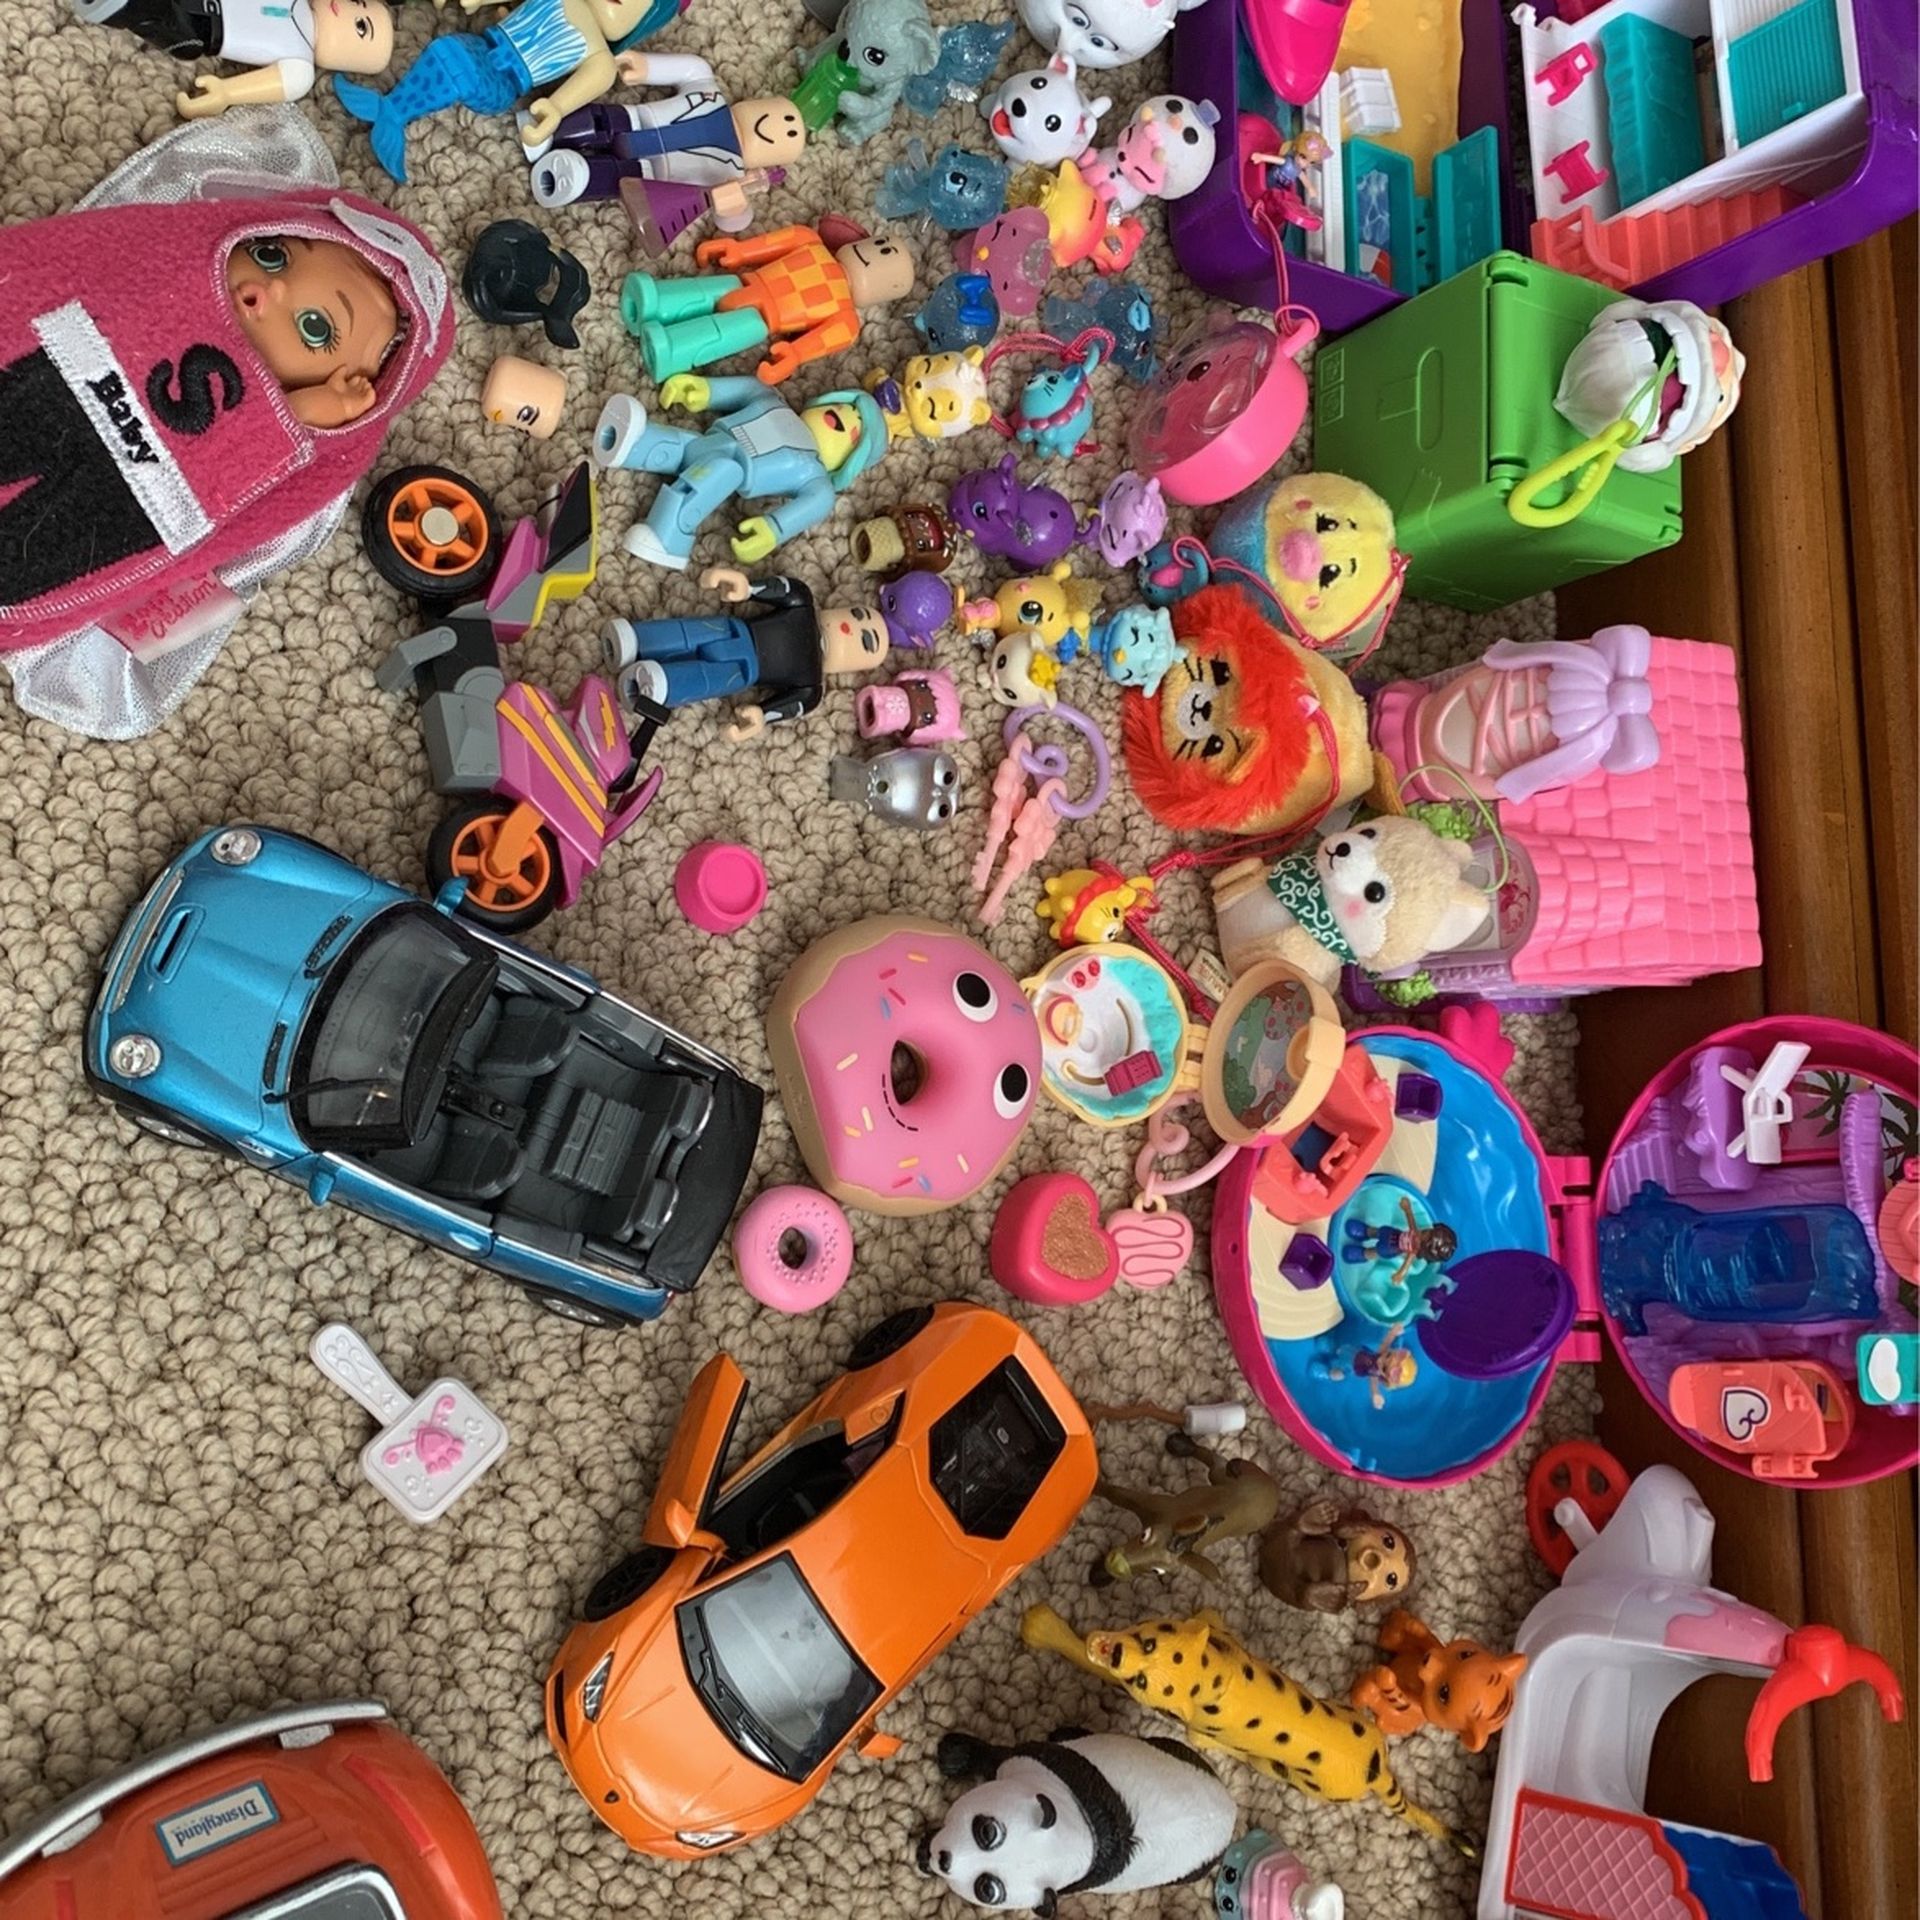 My Daughters Toys!